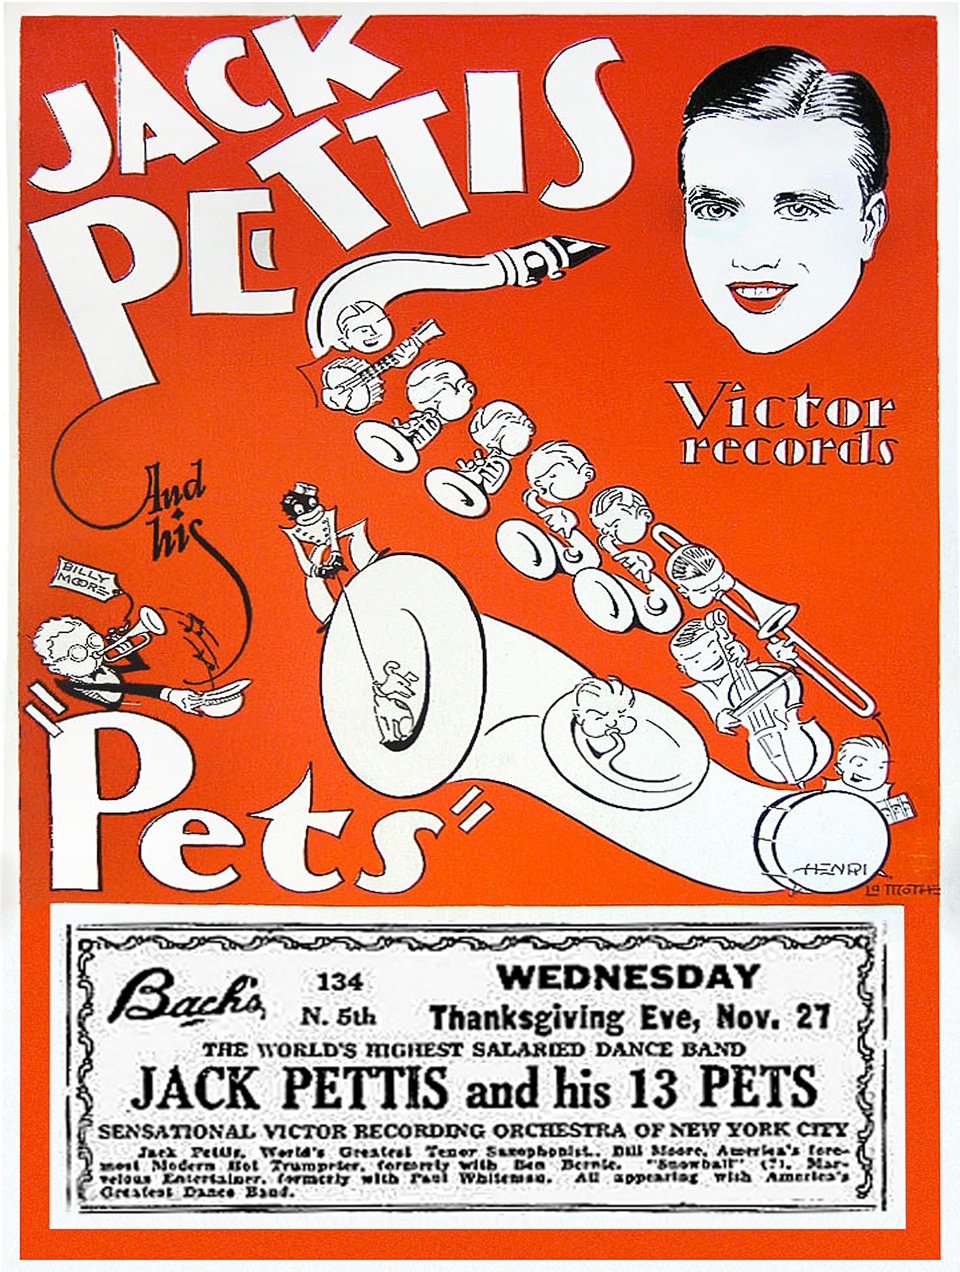 Jack Pettis and his 13 Pets - 1930